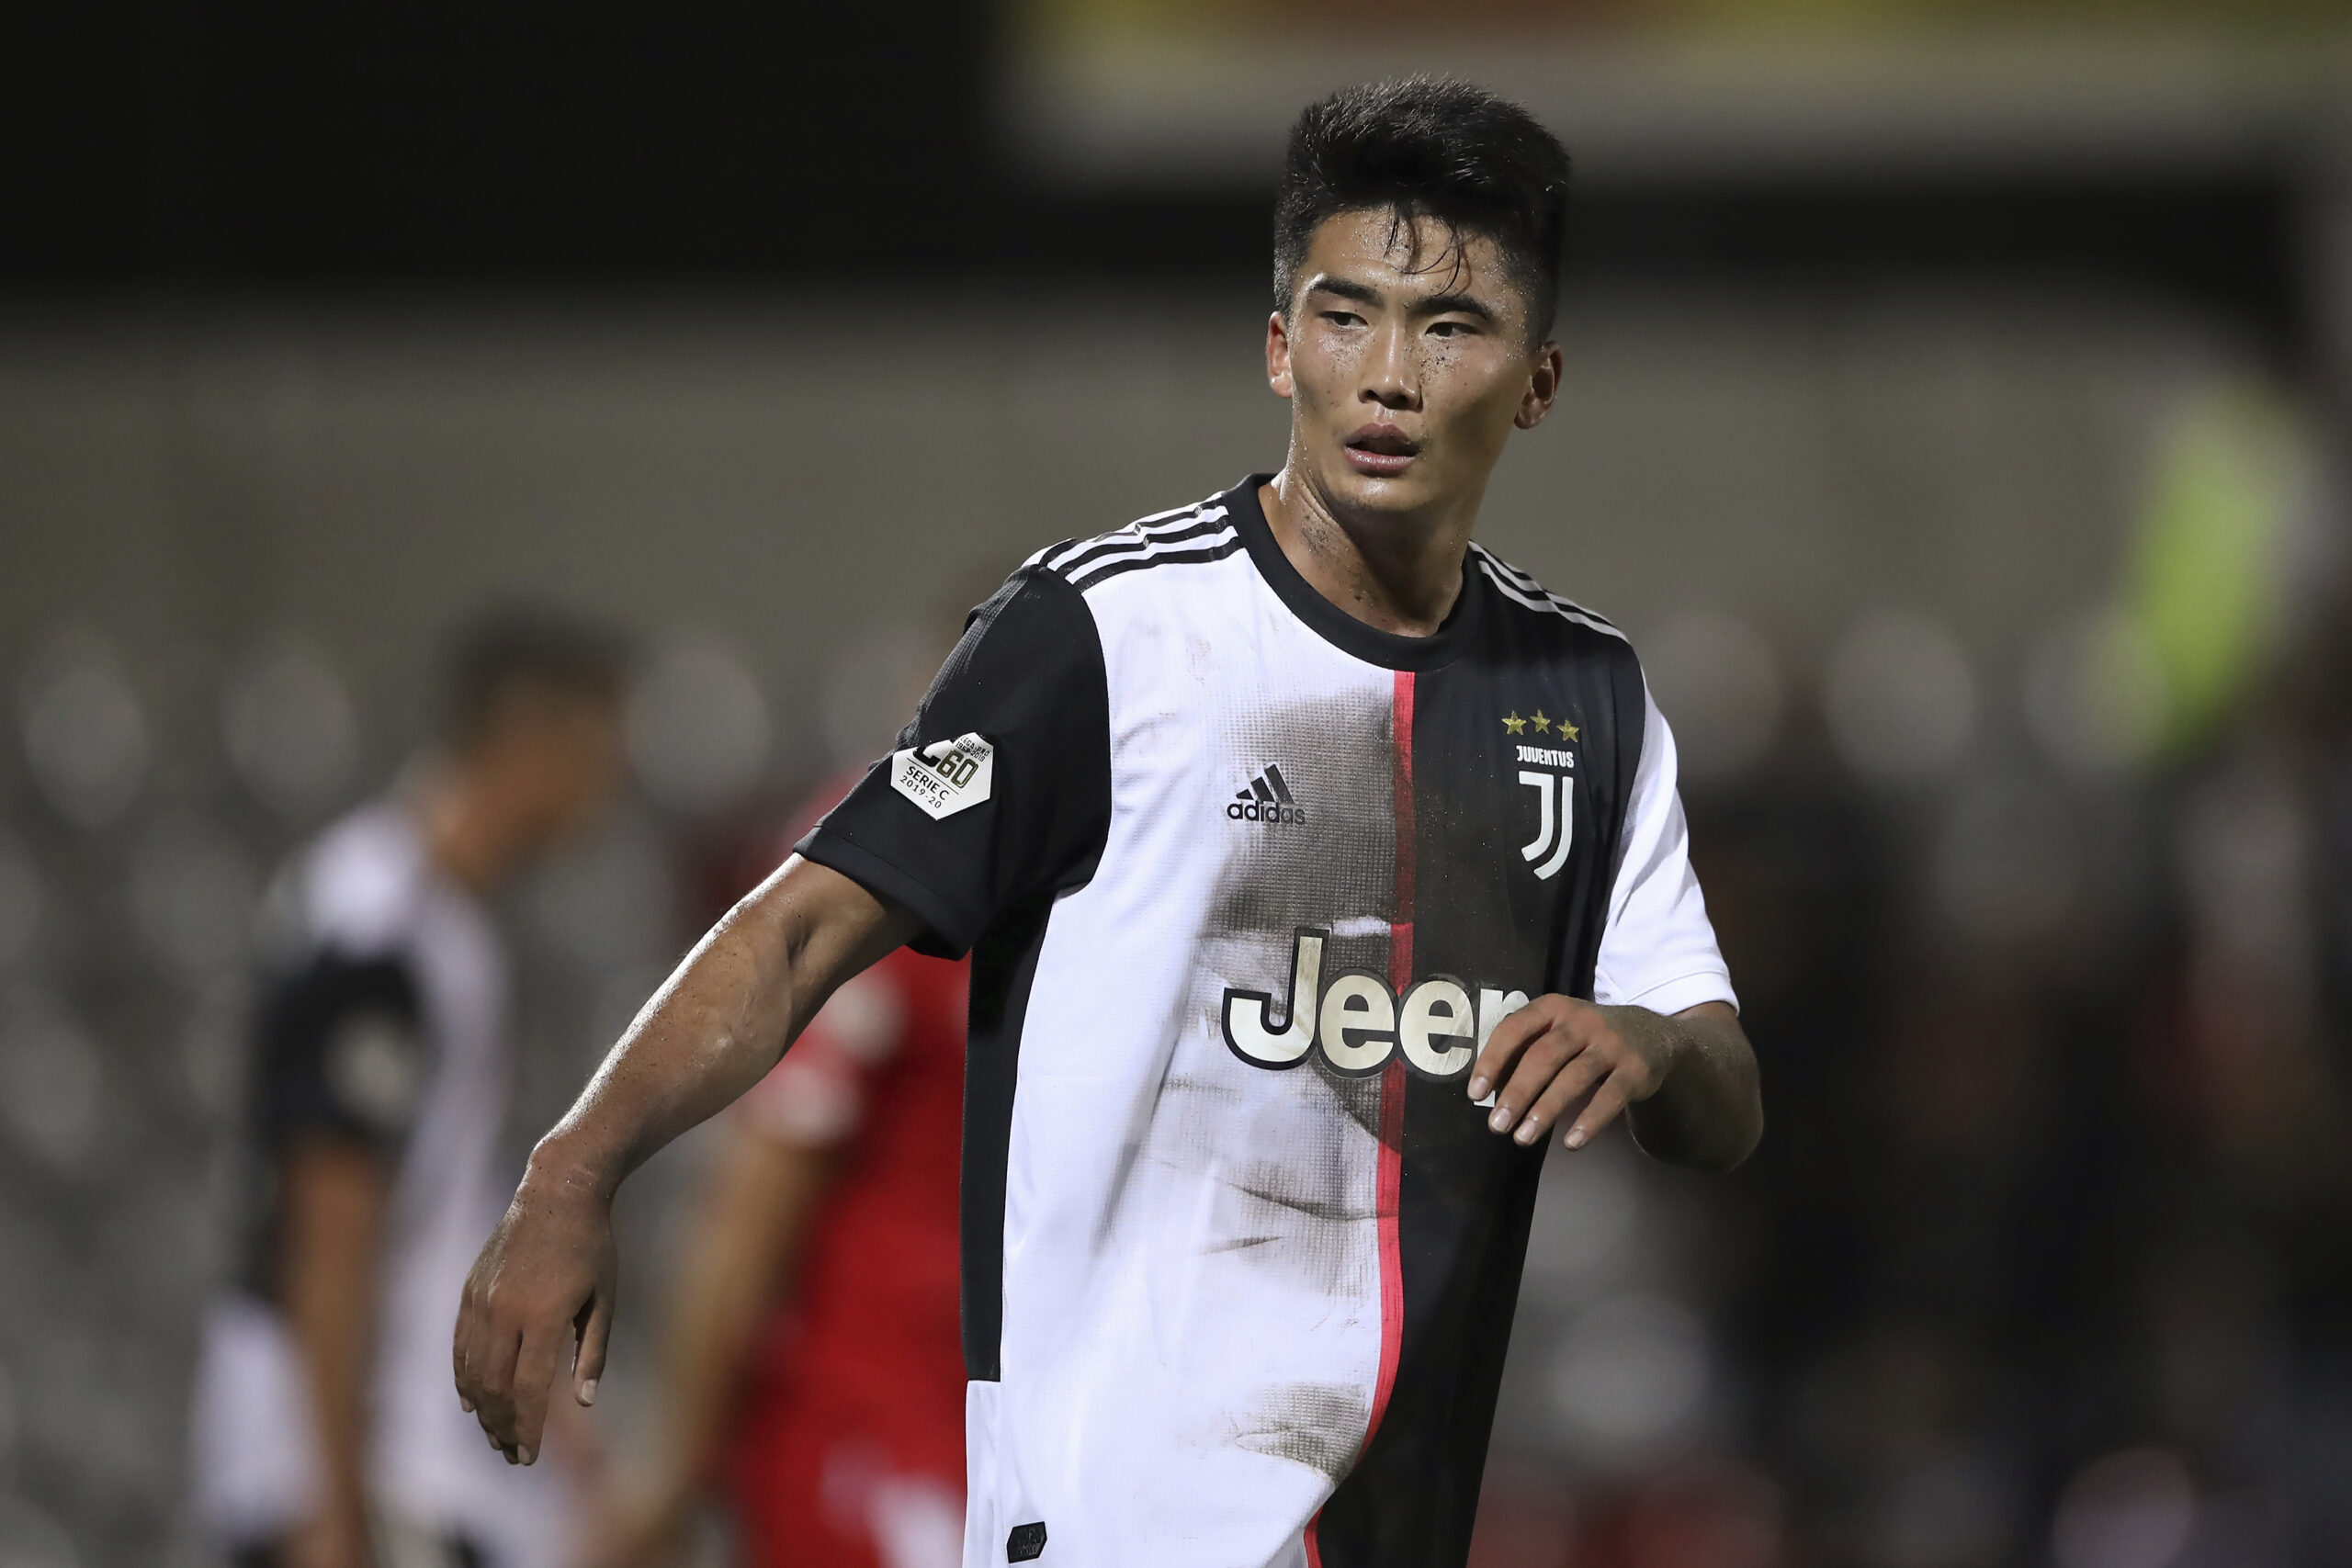 September 30, 2019, Alessandria, United Kingdom: Han Kwang-song of Juventus during the Lega Pro Serie C group A match at Stadio Giuseppe Moccagatta - Alessandria. Picture date: 30th September 2019. Picture credit should read: Jonathan Moscrop/Sportimage(Credit Image: © Jonathan Moscrop/CSM via ZUMA Wire) (Cal Sport Media via AP Images)